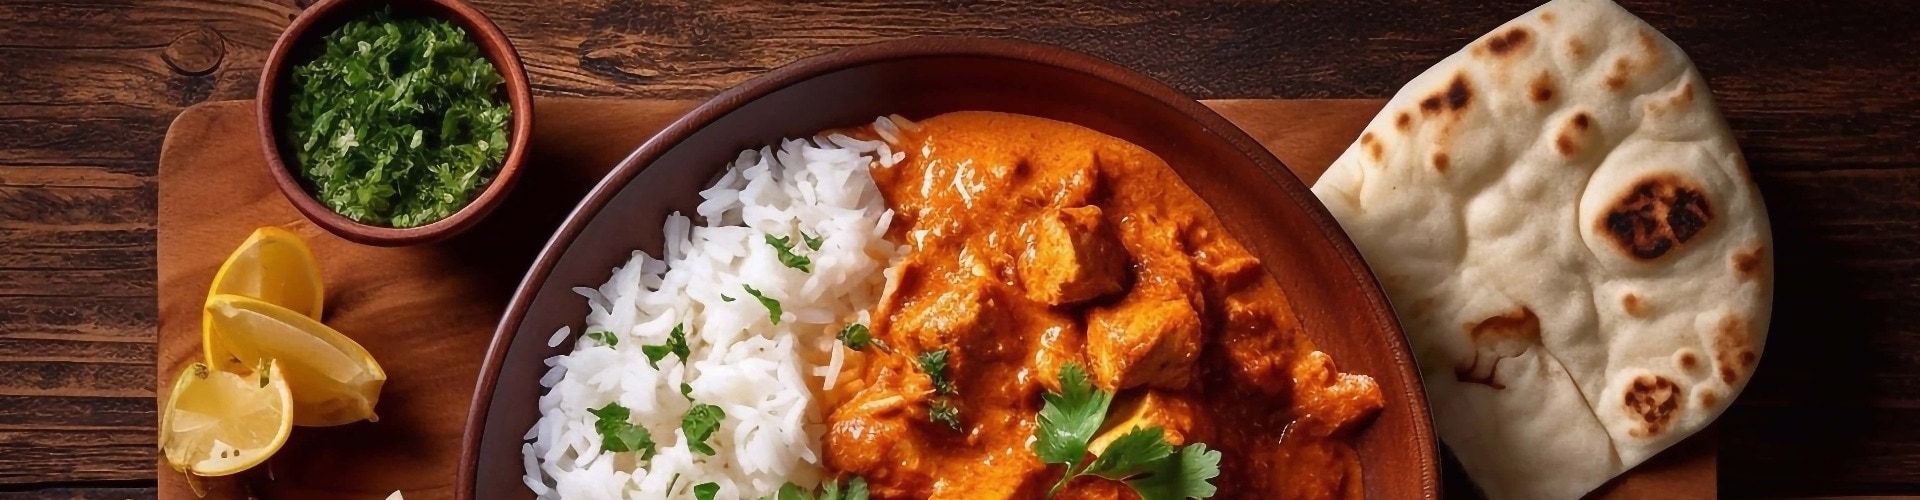 Traditional Indian dish Chicken tikka masala with spicy curry meat in bowl, basmati rice, bread naan on wooden dark background, top view, close up. Indian style dinner from above